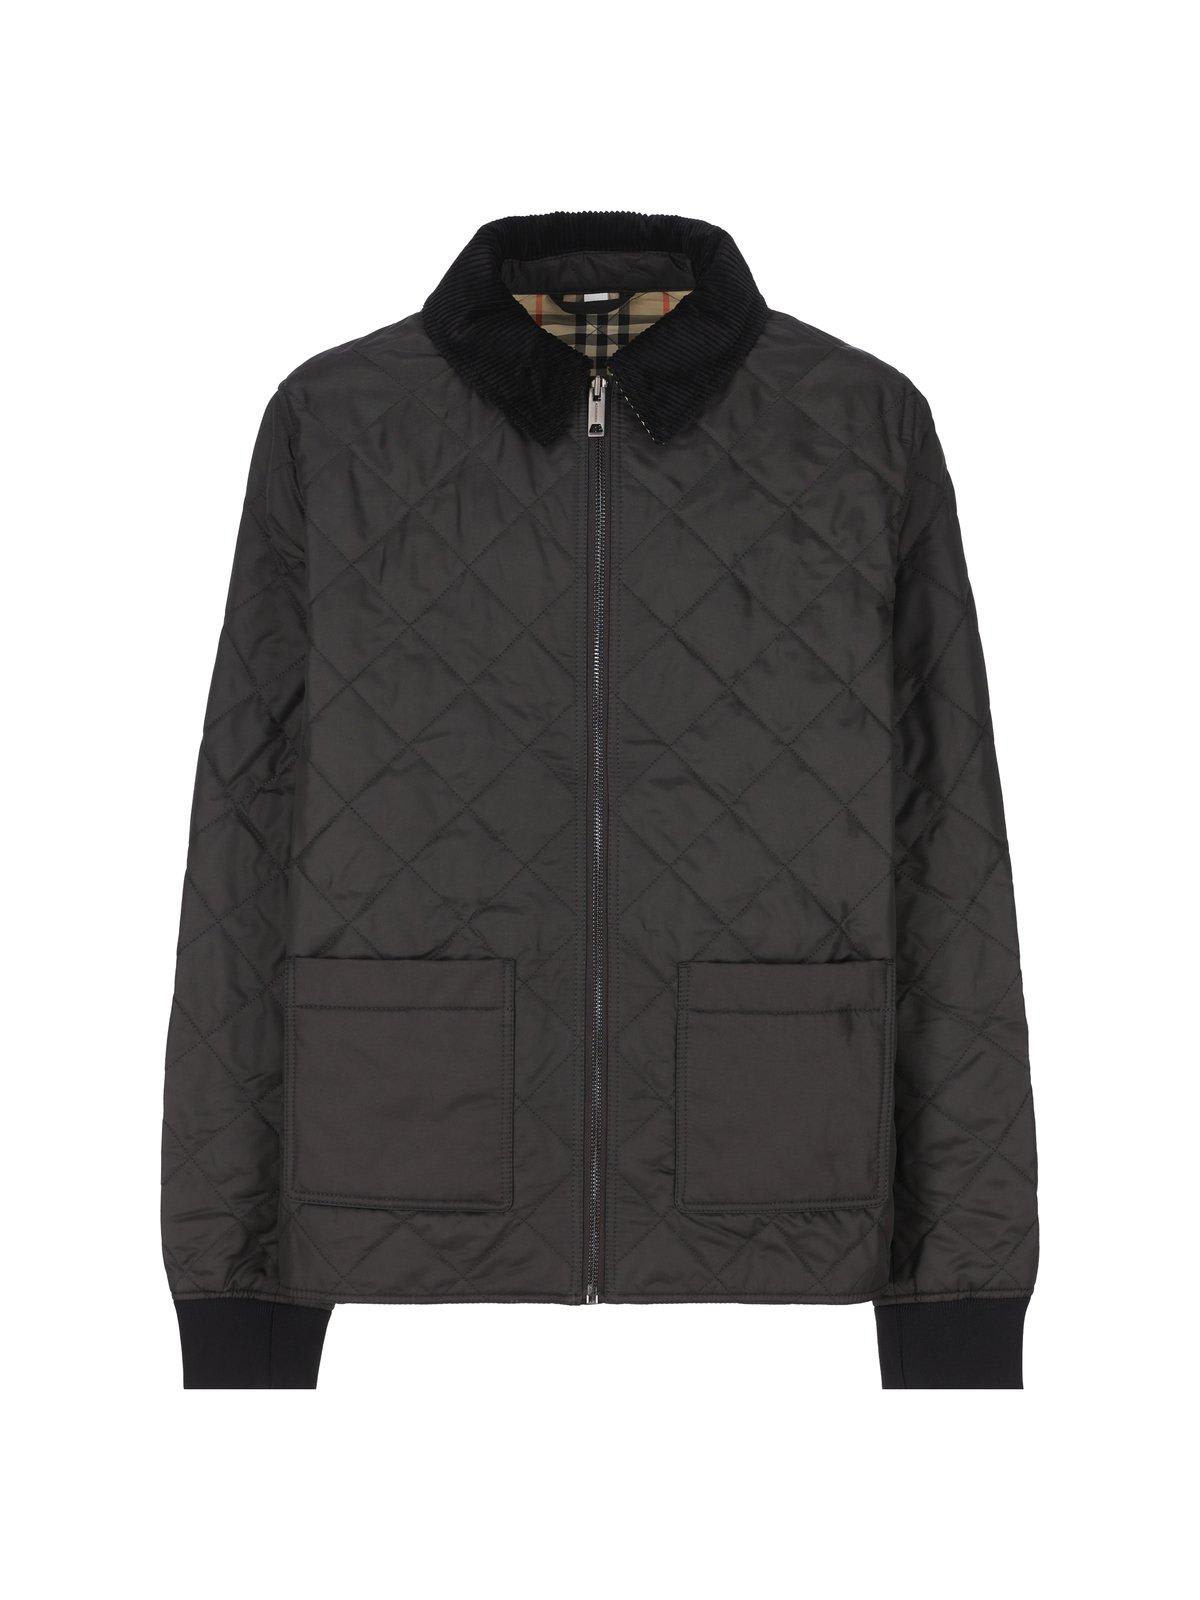 Burberry Diamond Quilted Zipped Jacket